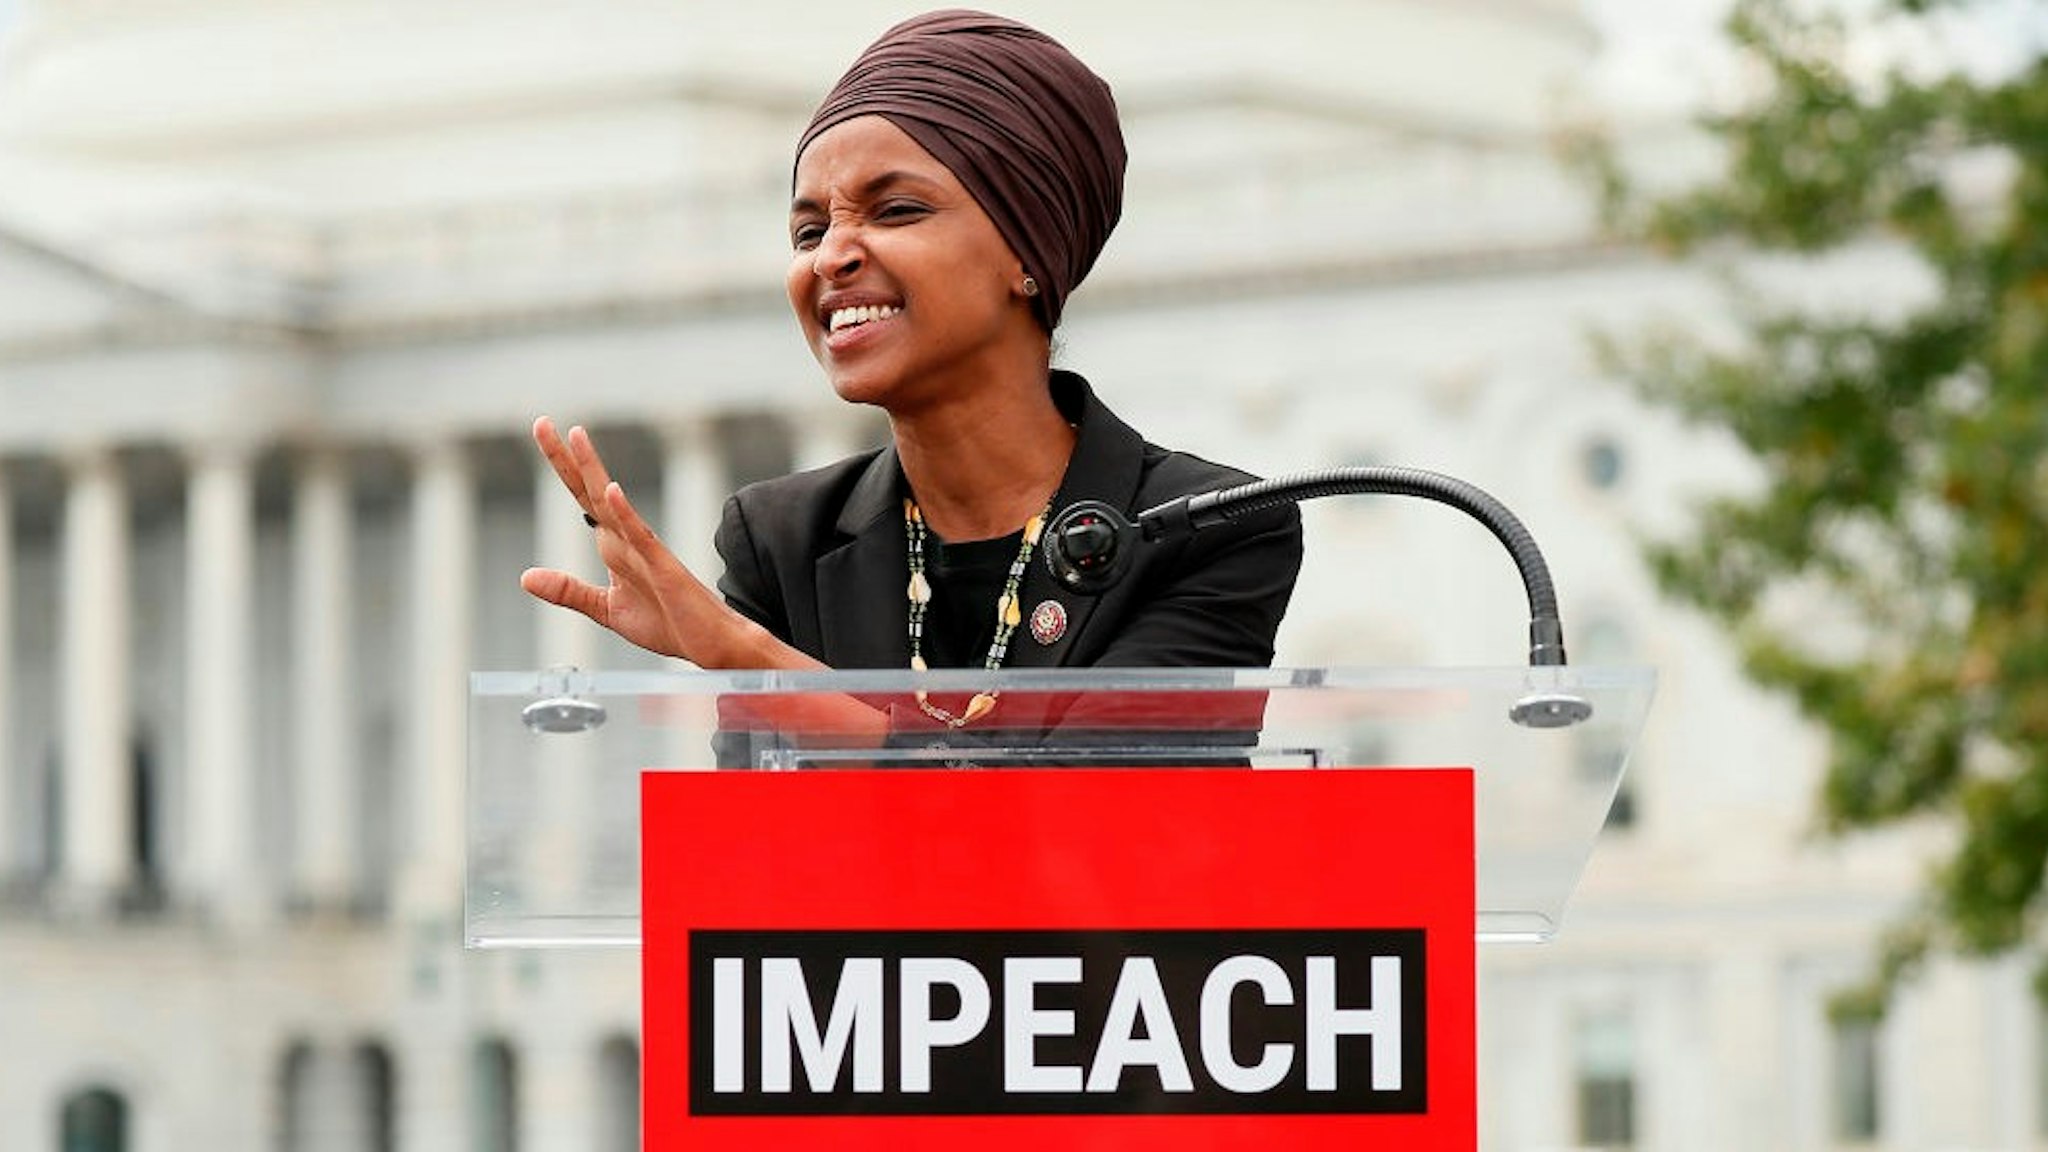 WASHINGTON, DC - SEPTEMBER 26: Rep. Ilhan Omar (D-MN) speaks at the “Impeachment Now!” rally in support of an immediate inquiry towards articles of impeachment against U.S. President Donald Trump on the grounds of the U.S. Capital on September 26, 2019in Washington, DC. (Photo by